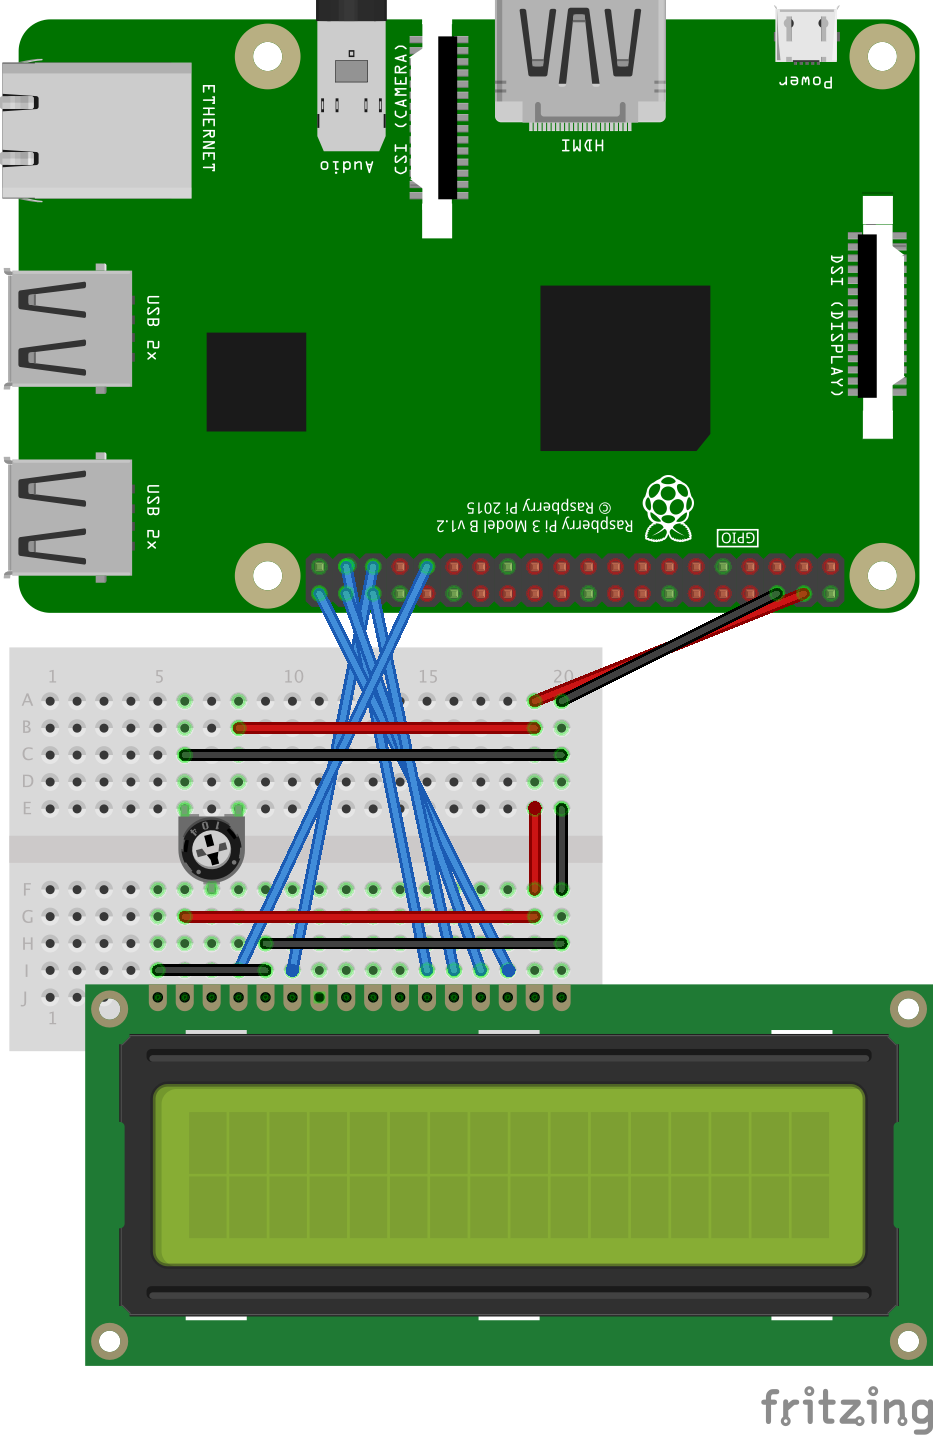 android-things-raspberry-pi-illustration-for-push-enabled-iot-device